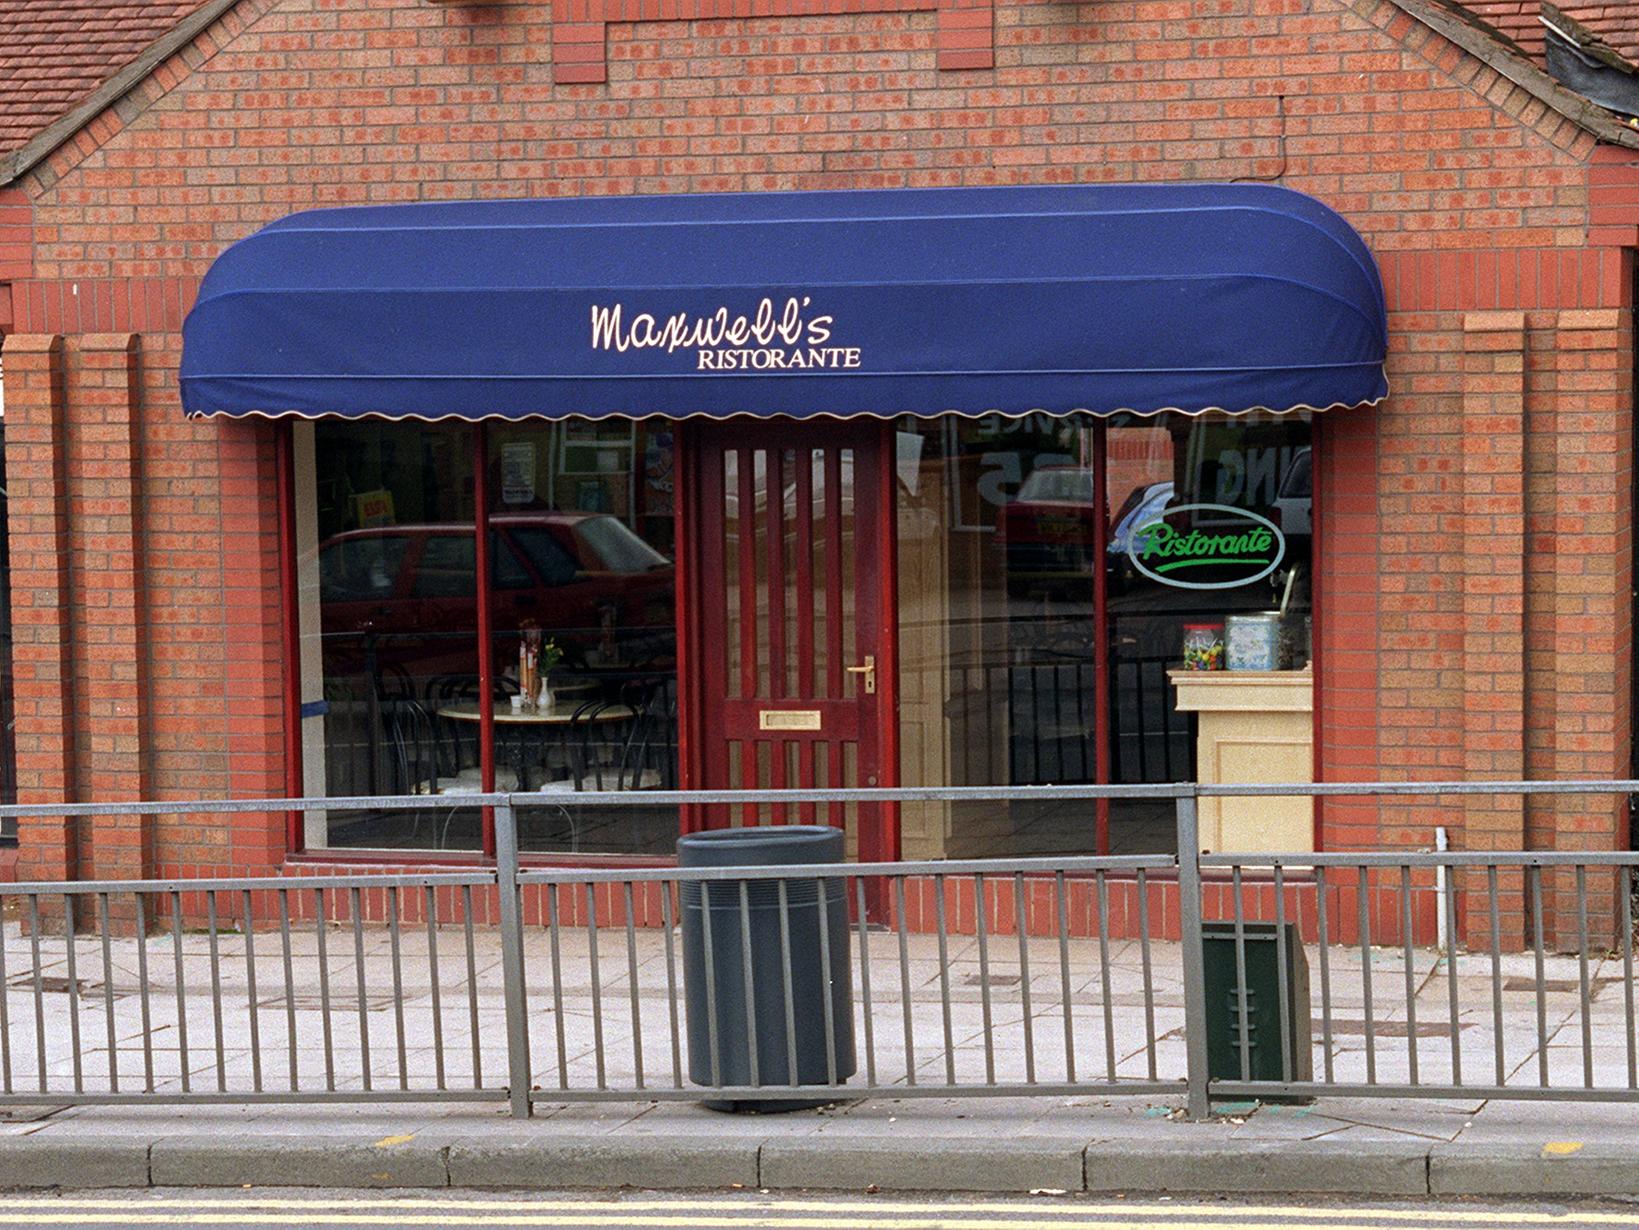 Did you enjoy a meal at Maxwell's restaurant on Selby Road?